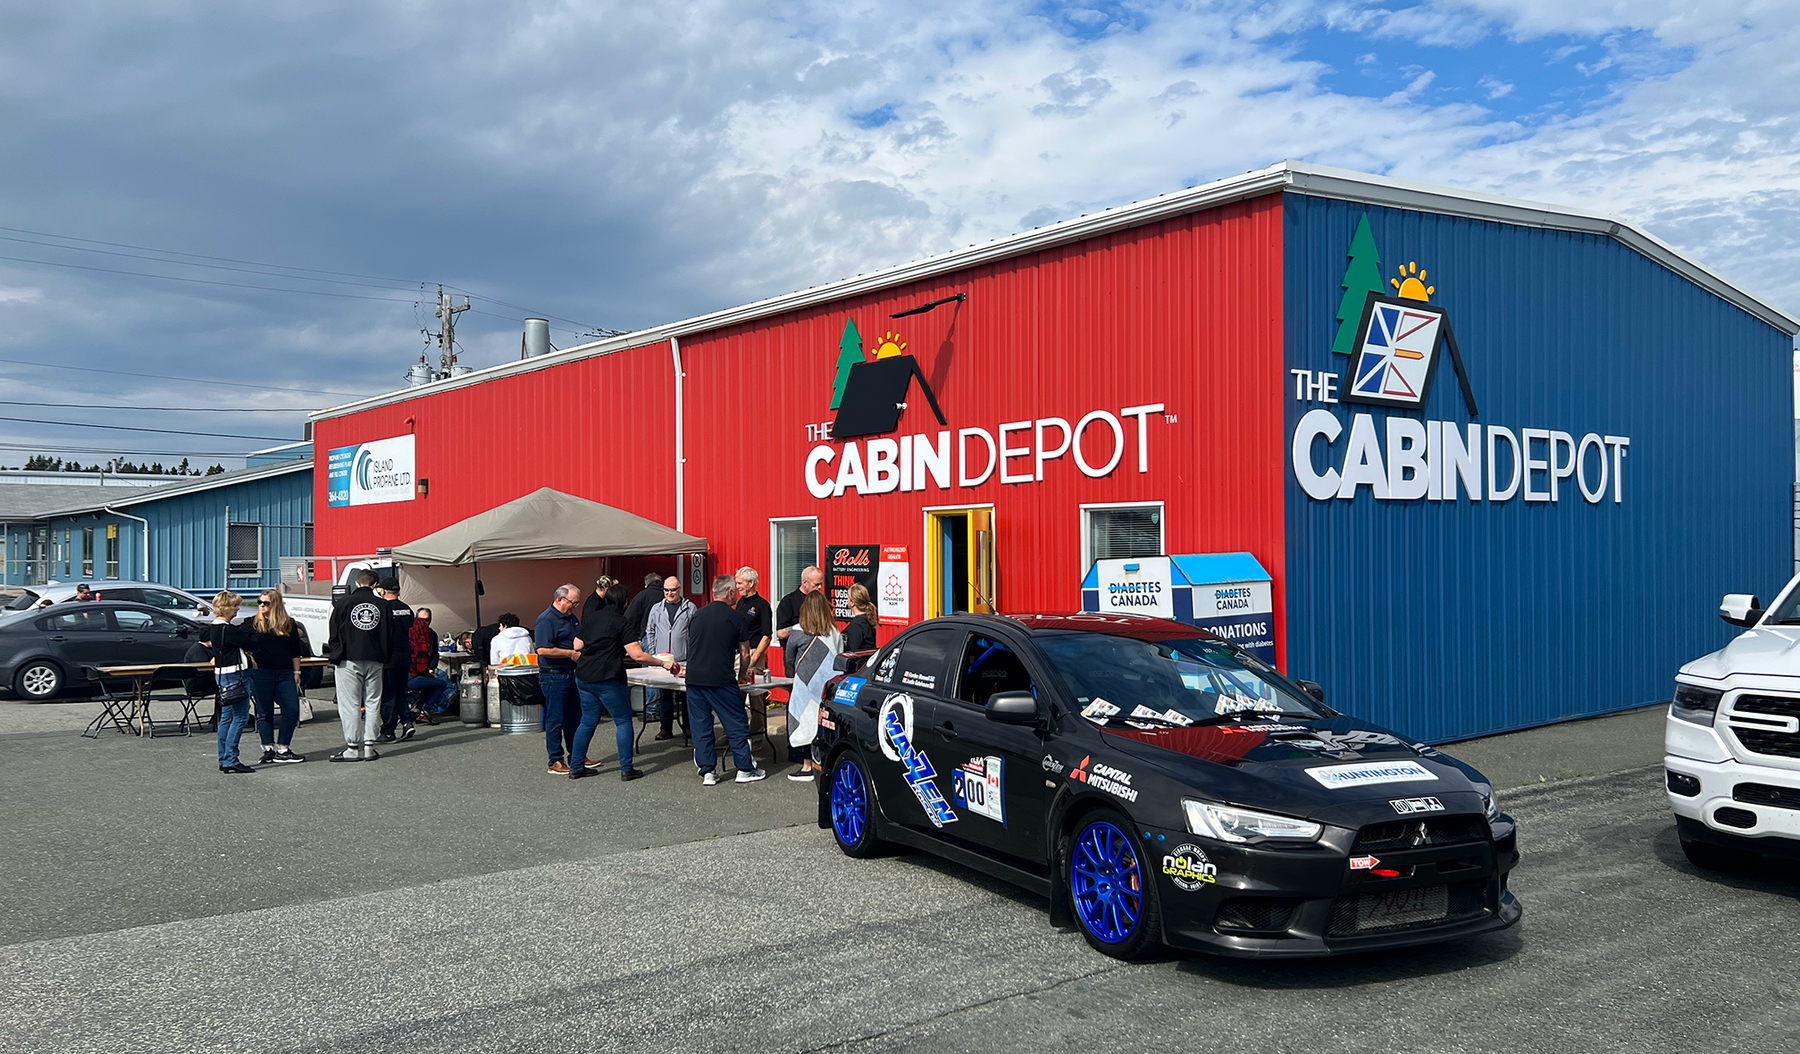 The Cabin Depot has arrived in Mount Pearl, Newfoundland